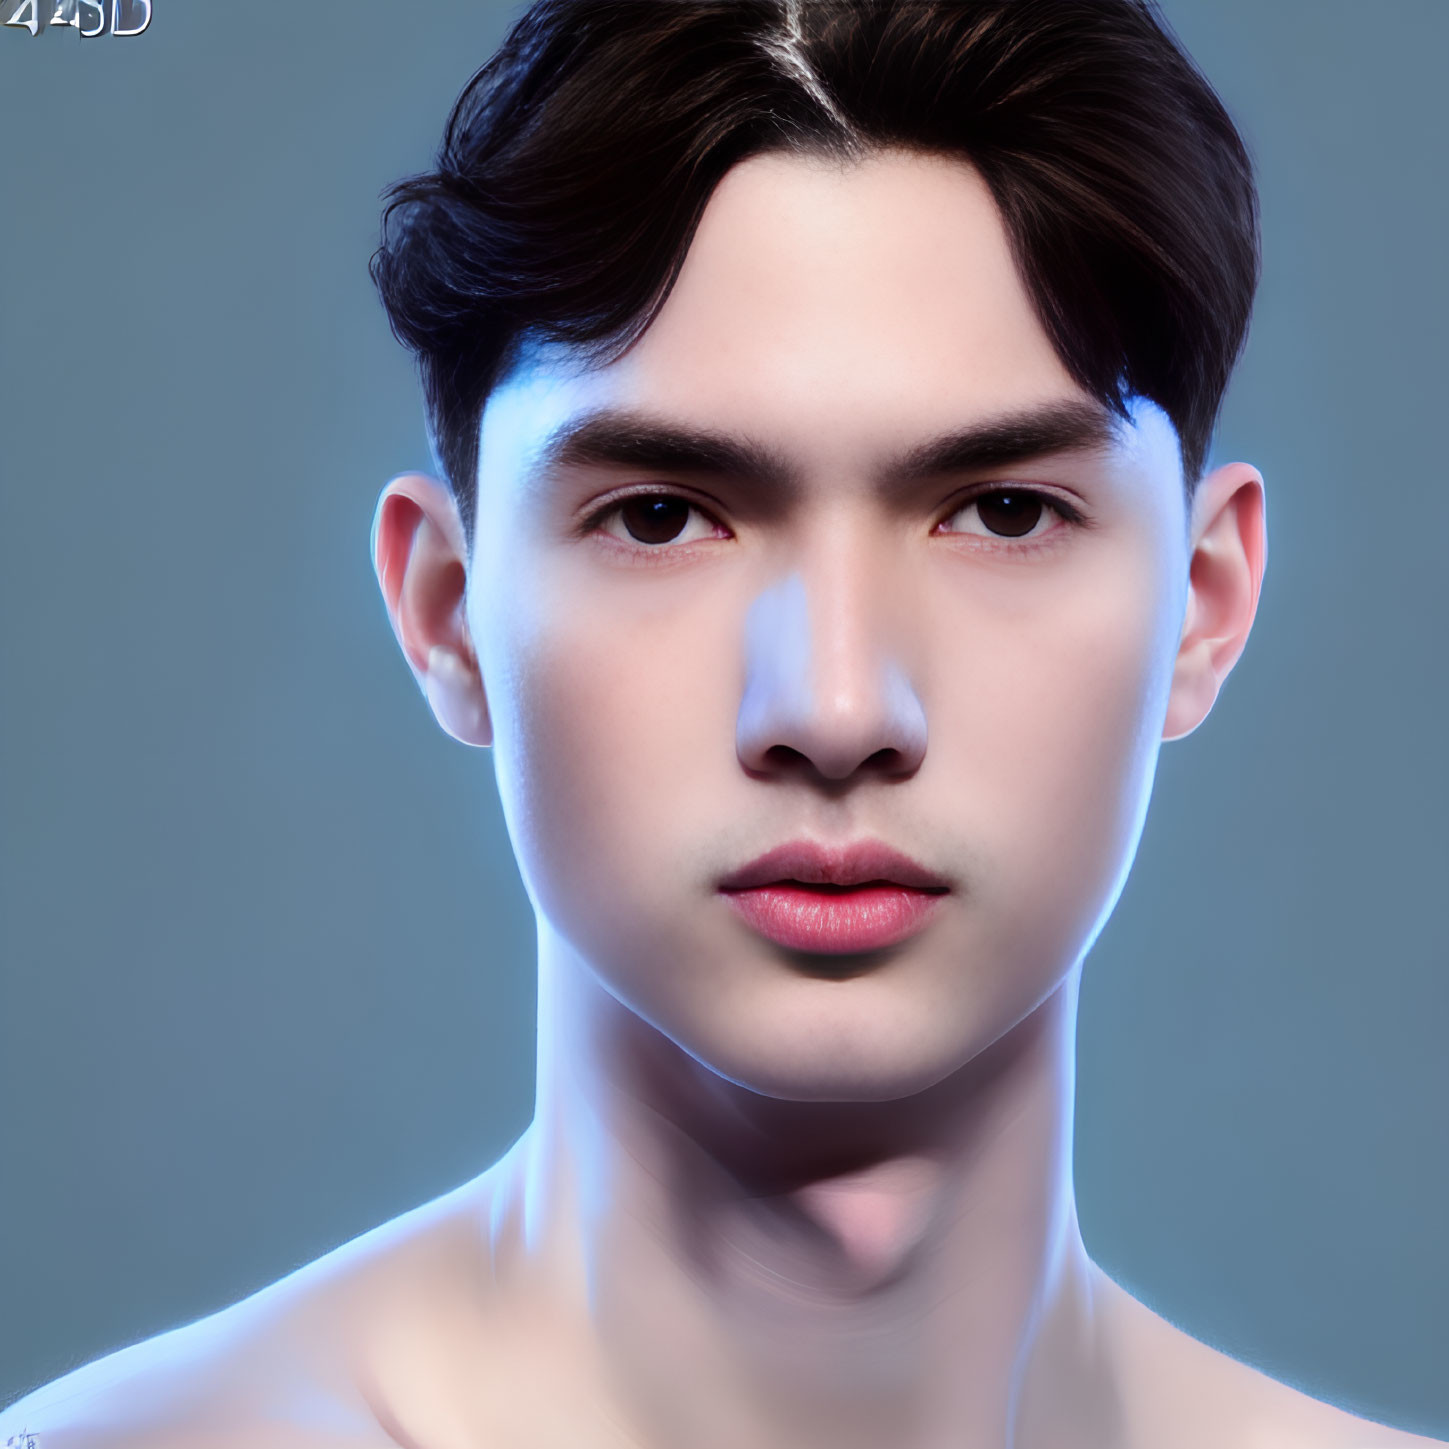 Young man with fair skin and slicked-back hair in digital portrait